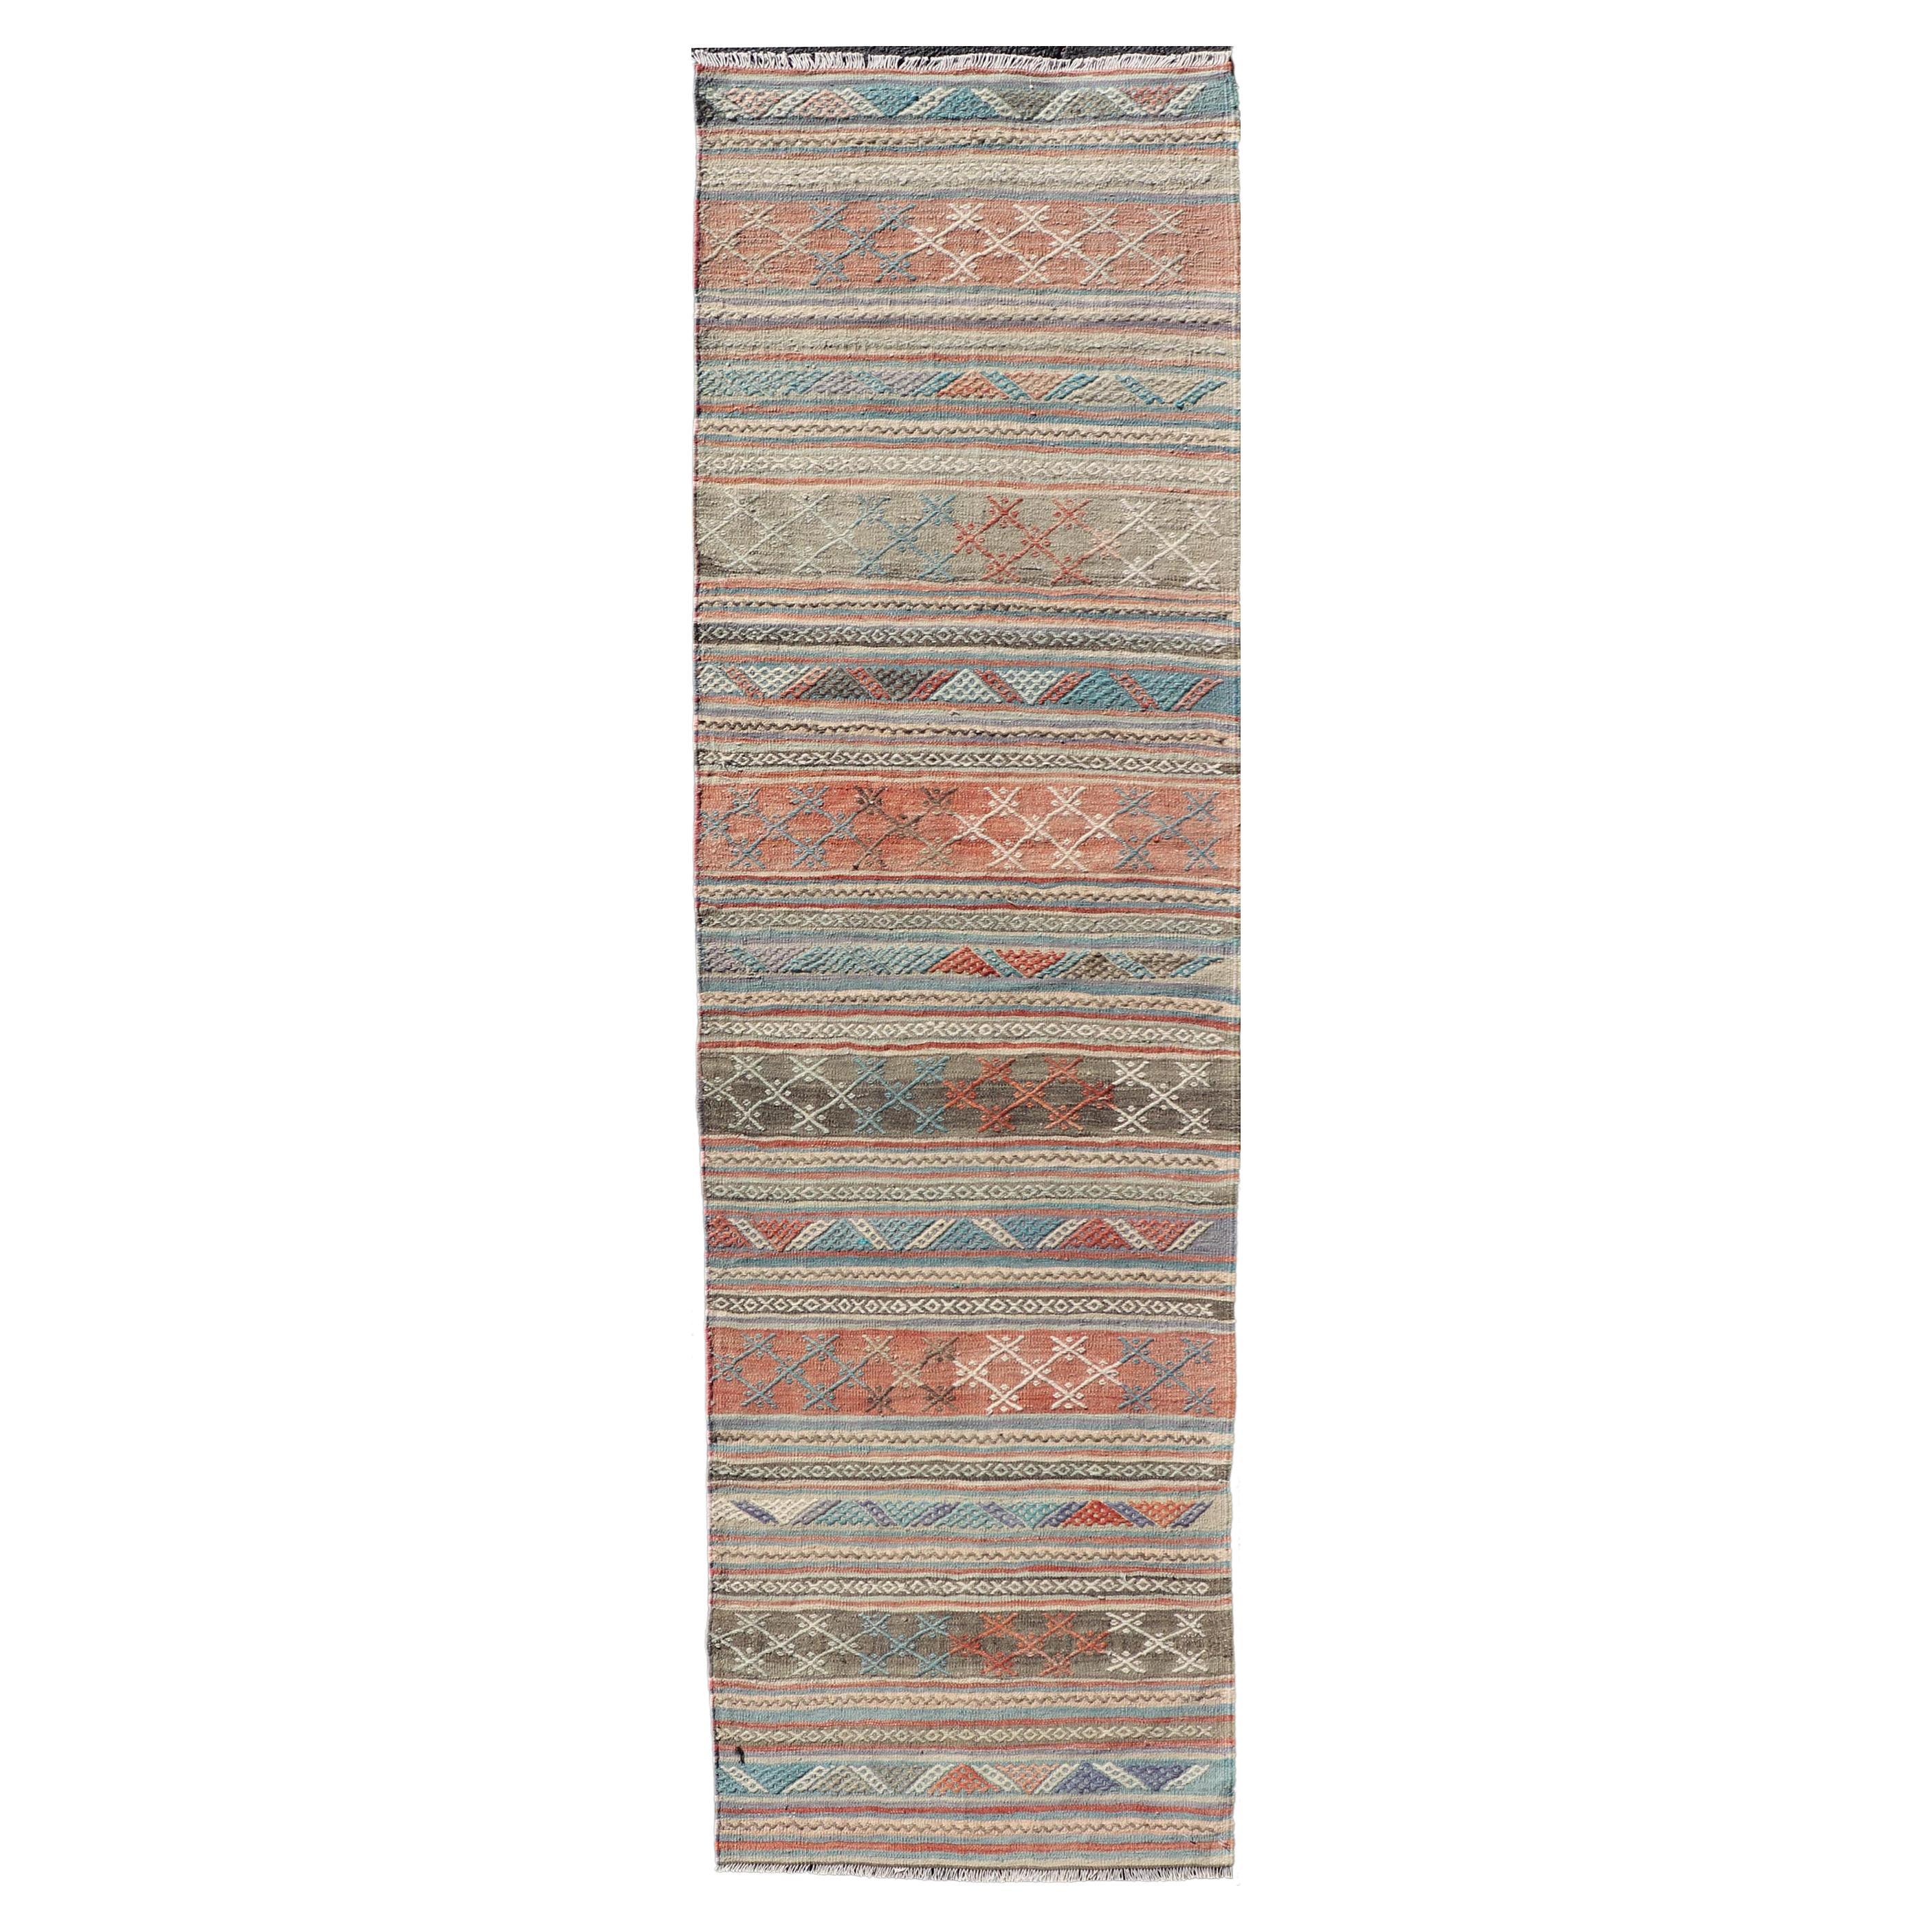 Vintage Turkish Colorful Kilim Runner with Stripe Design in Tan and Orange's For Sale